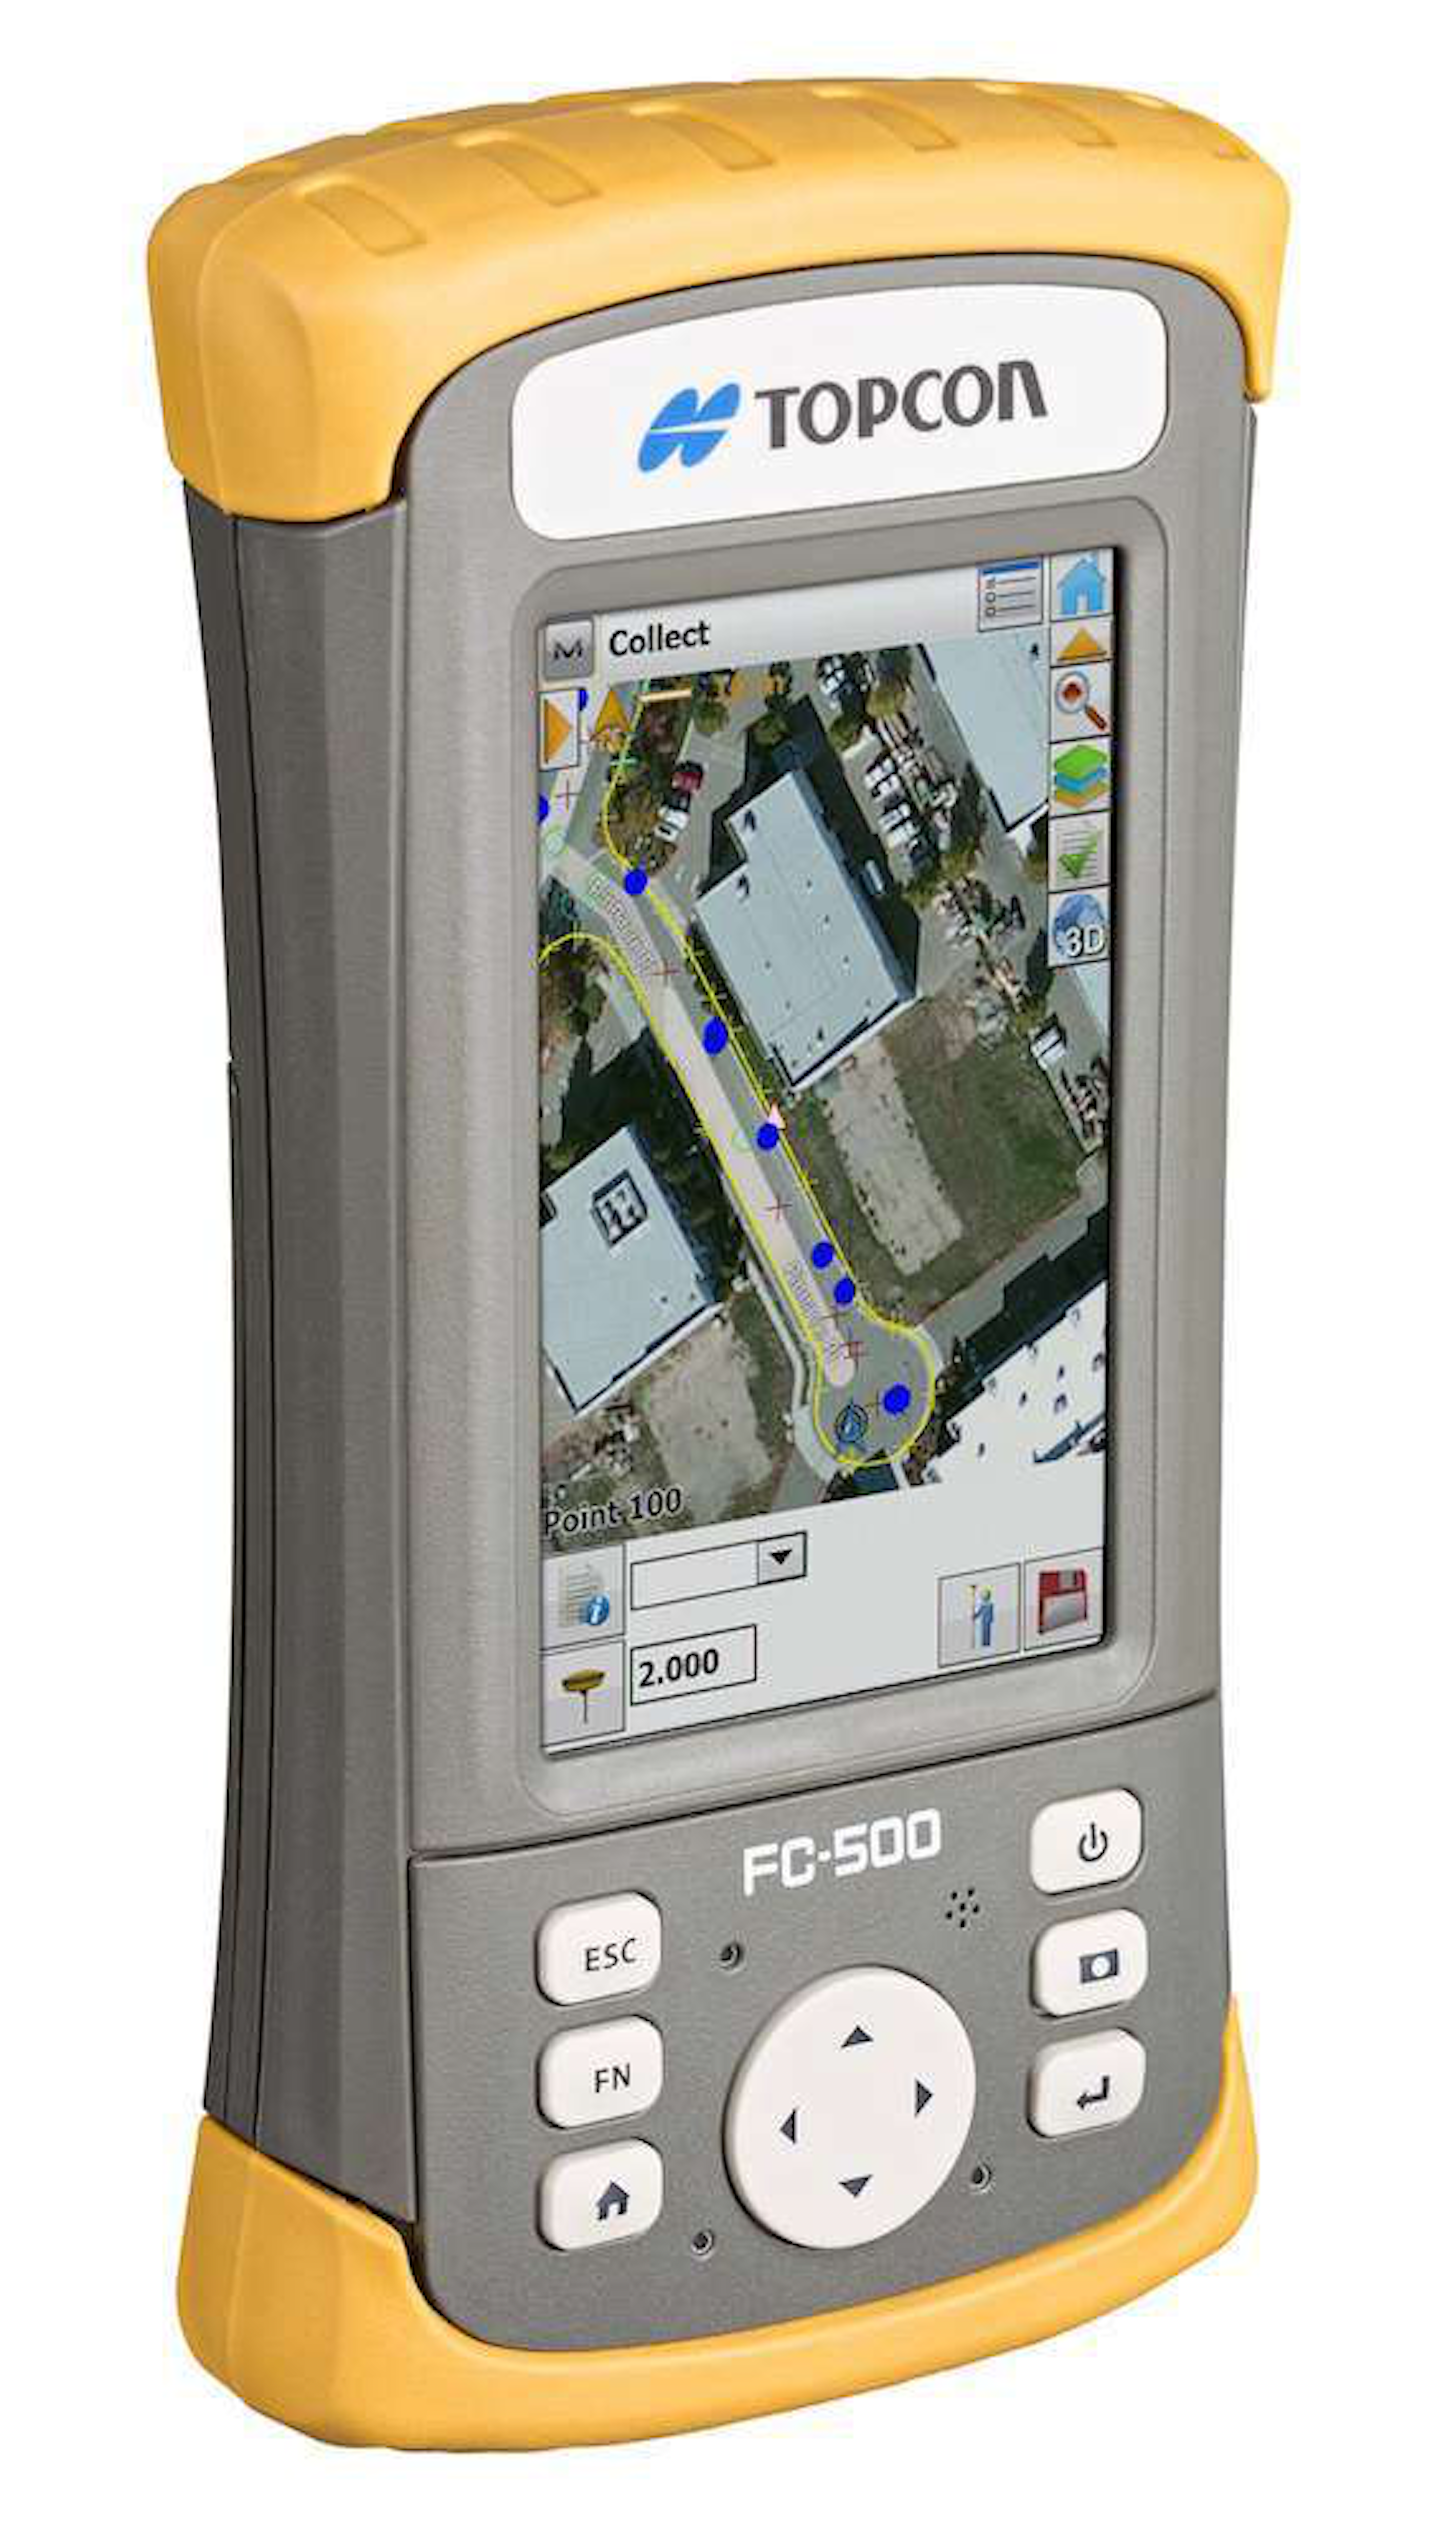 Topcon FC-500 data collector lets you map projects and share data